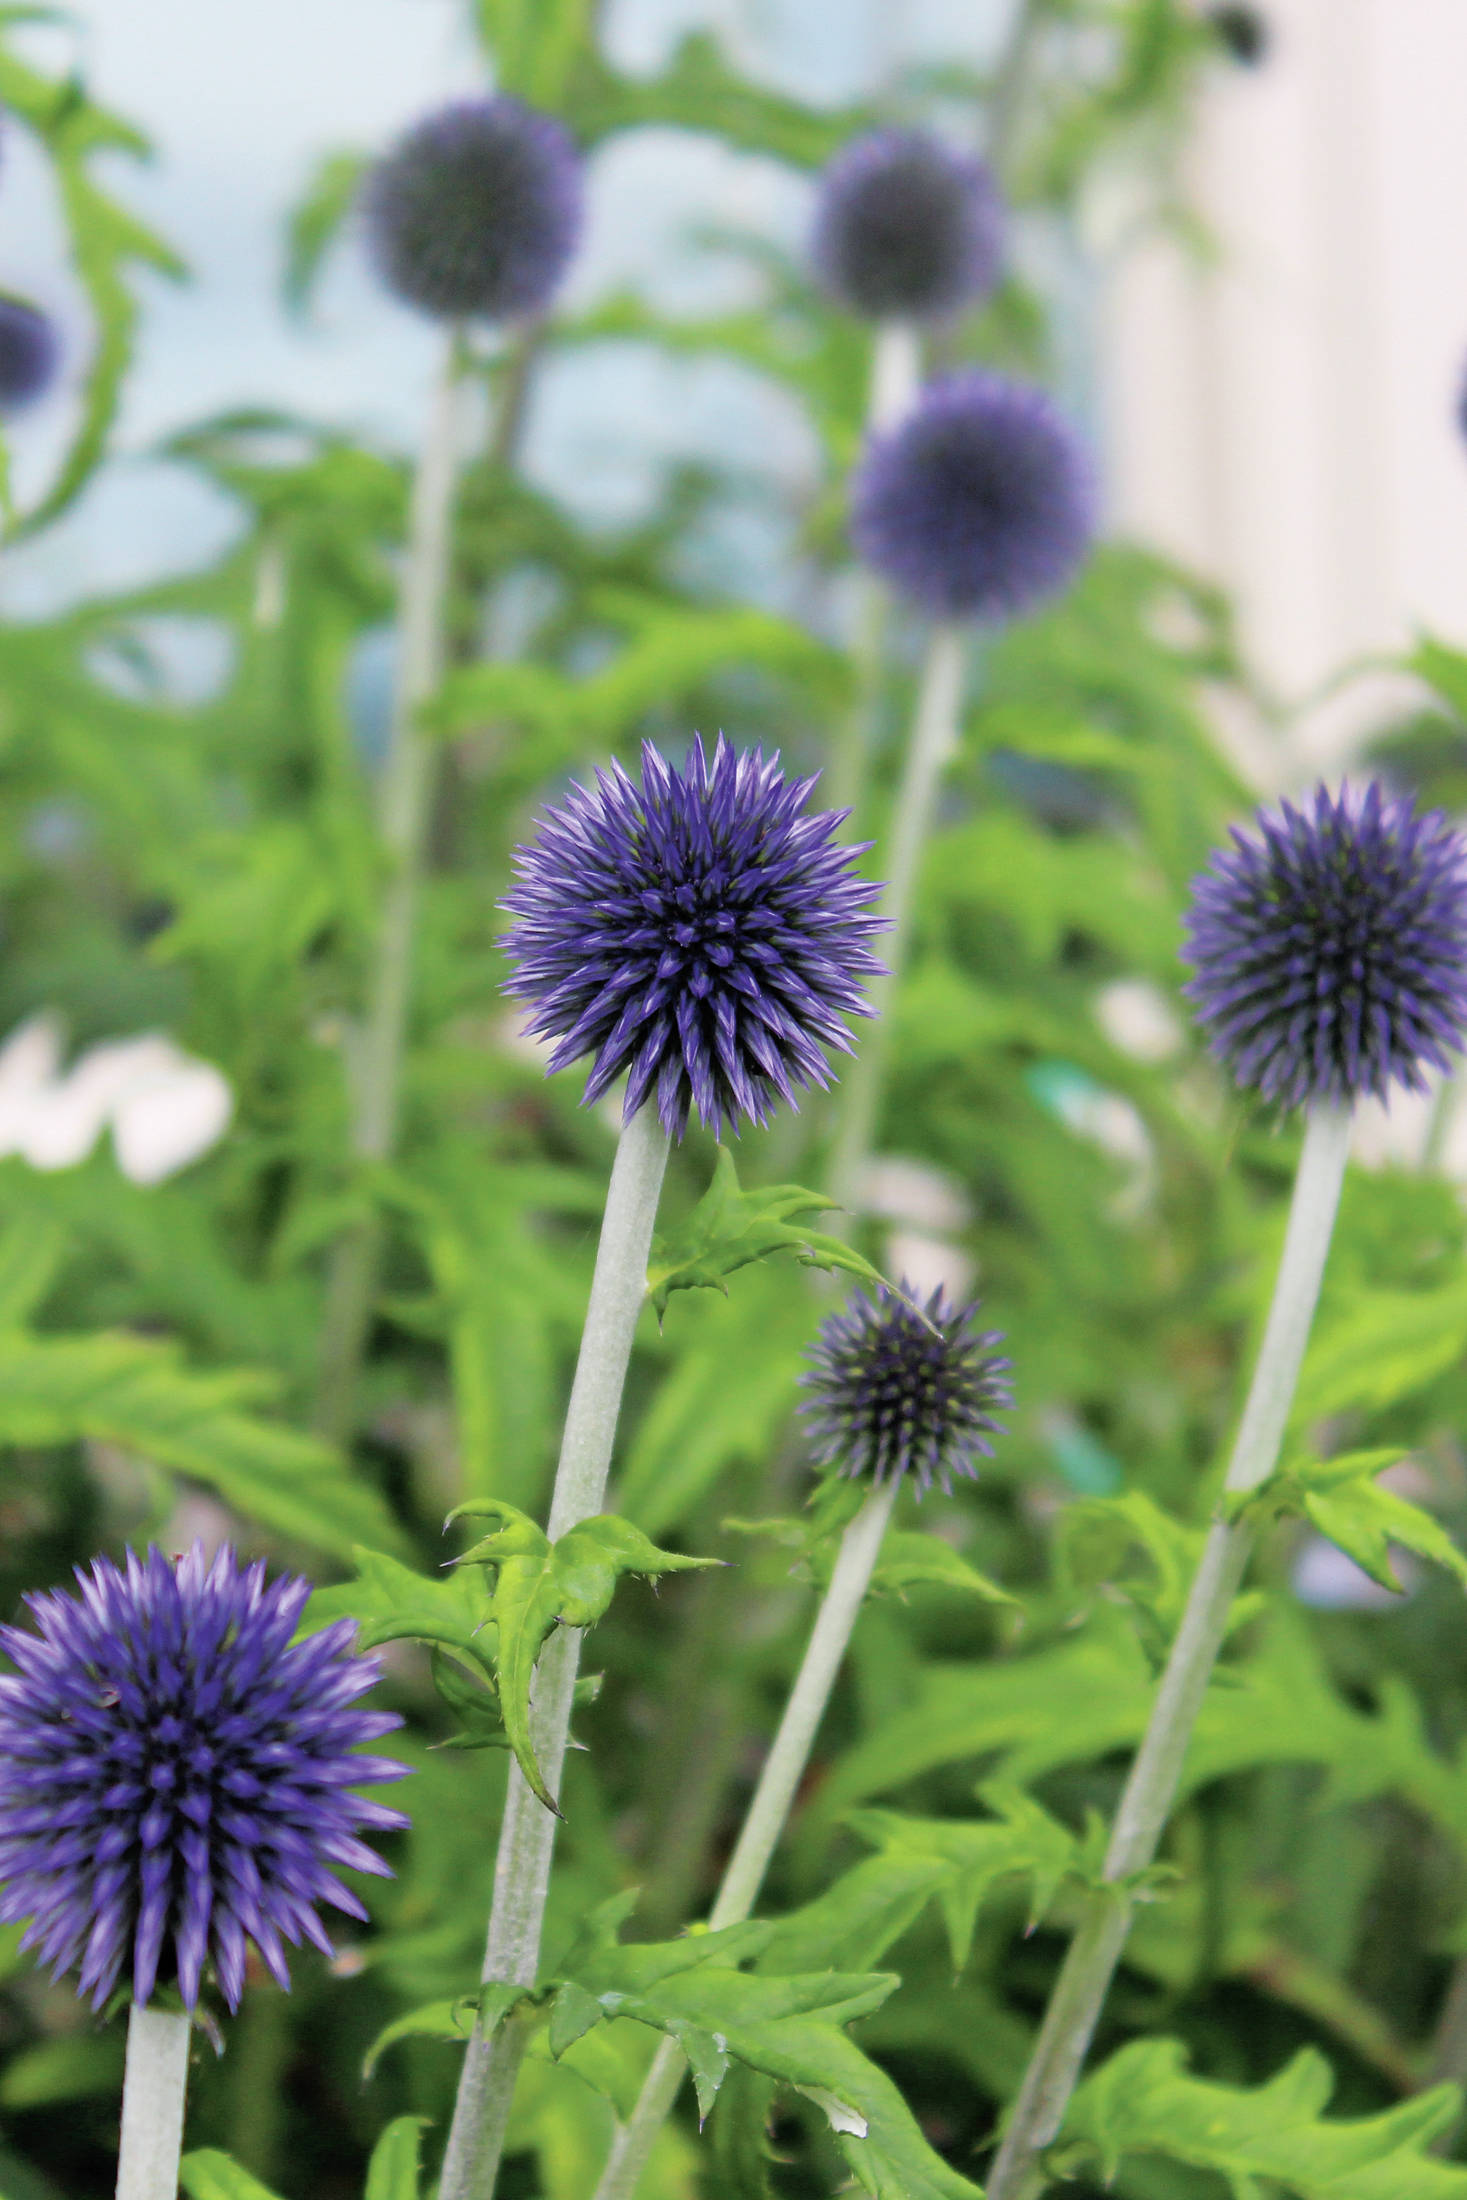 Spiky purple flowers catch the eyes of passersby at one of five gardens featured in this year’s Garden Tour, held Sunday, July 28, 2019 in and around Homer, Alaska. (Photo by Megan Pacer/Homer News)